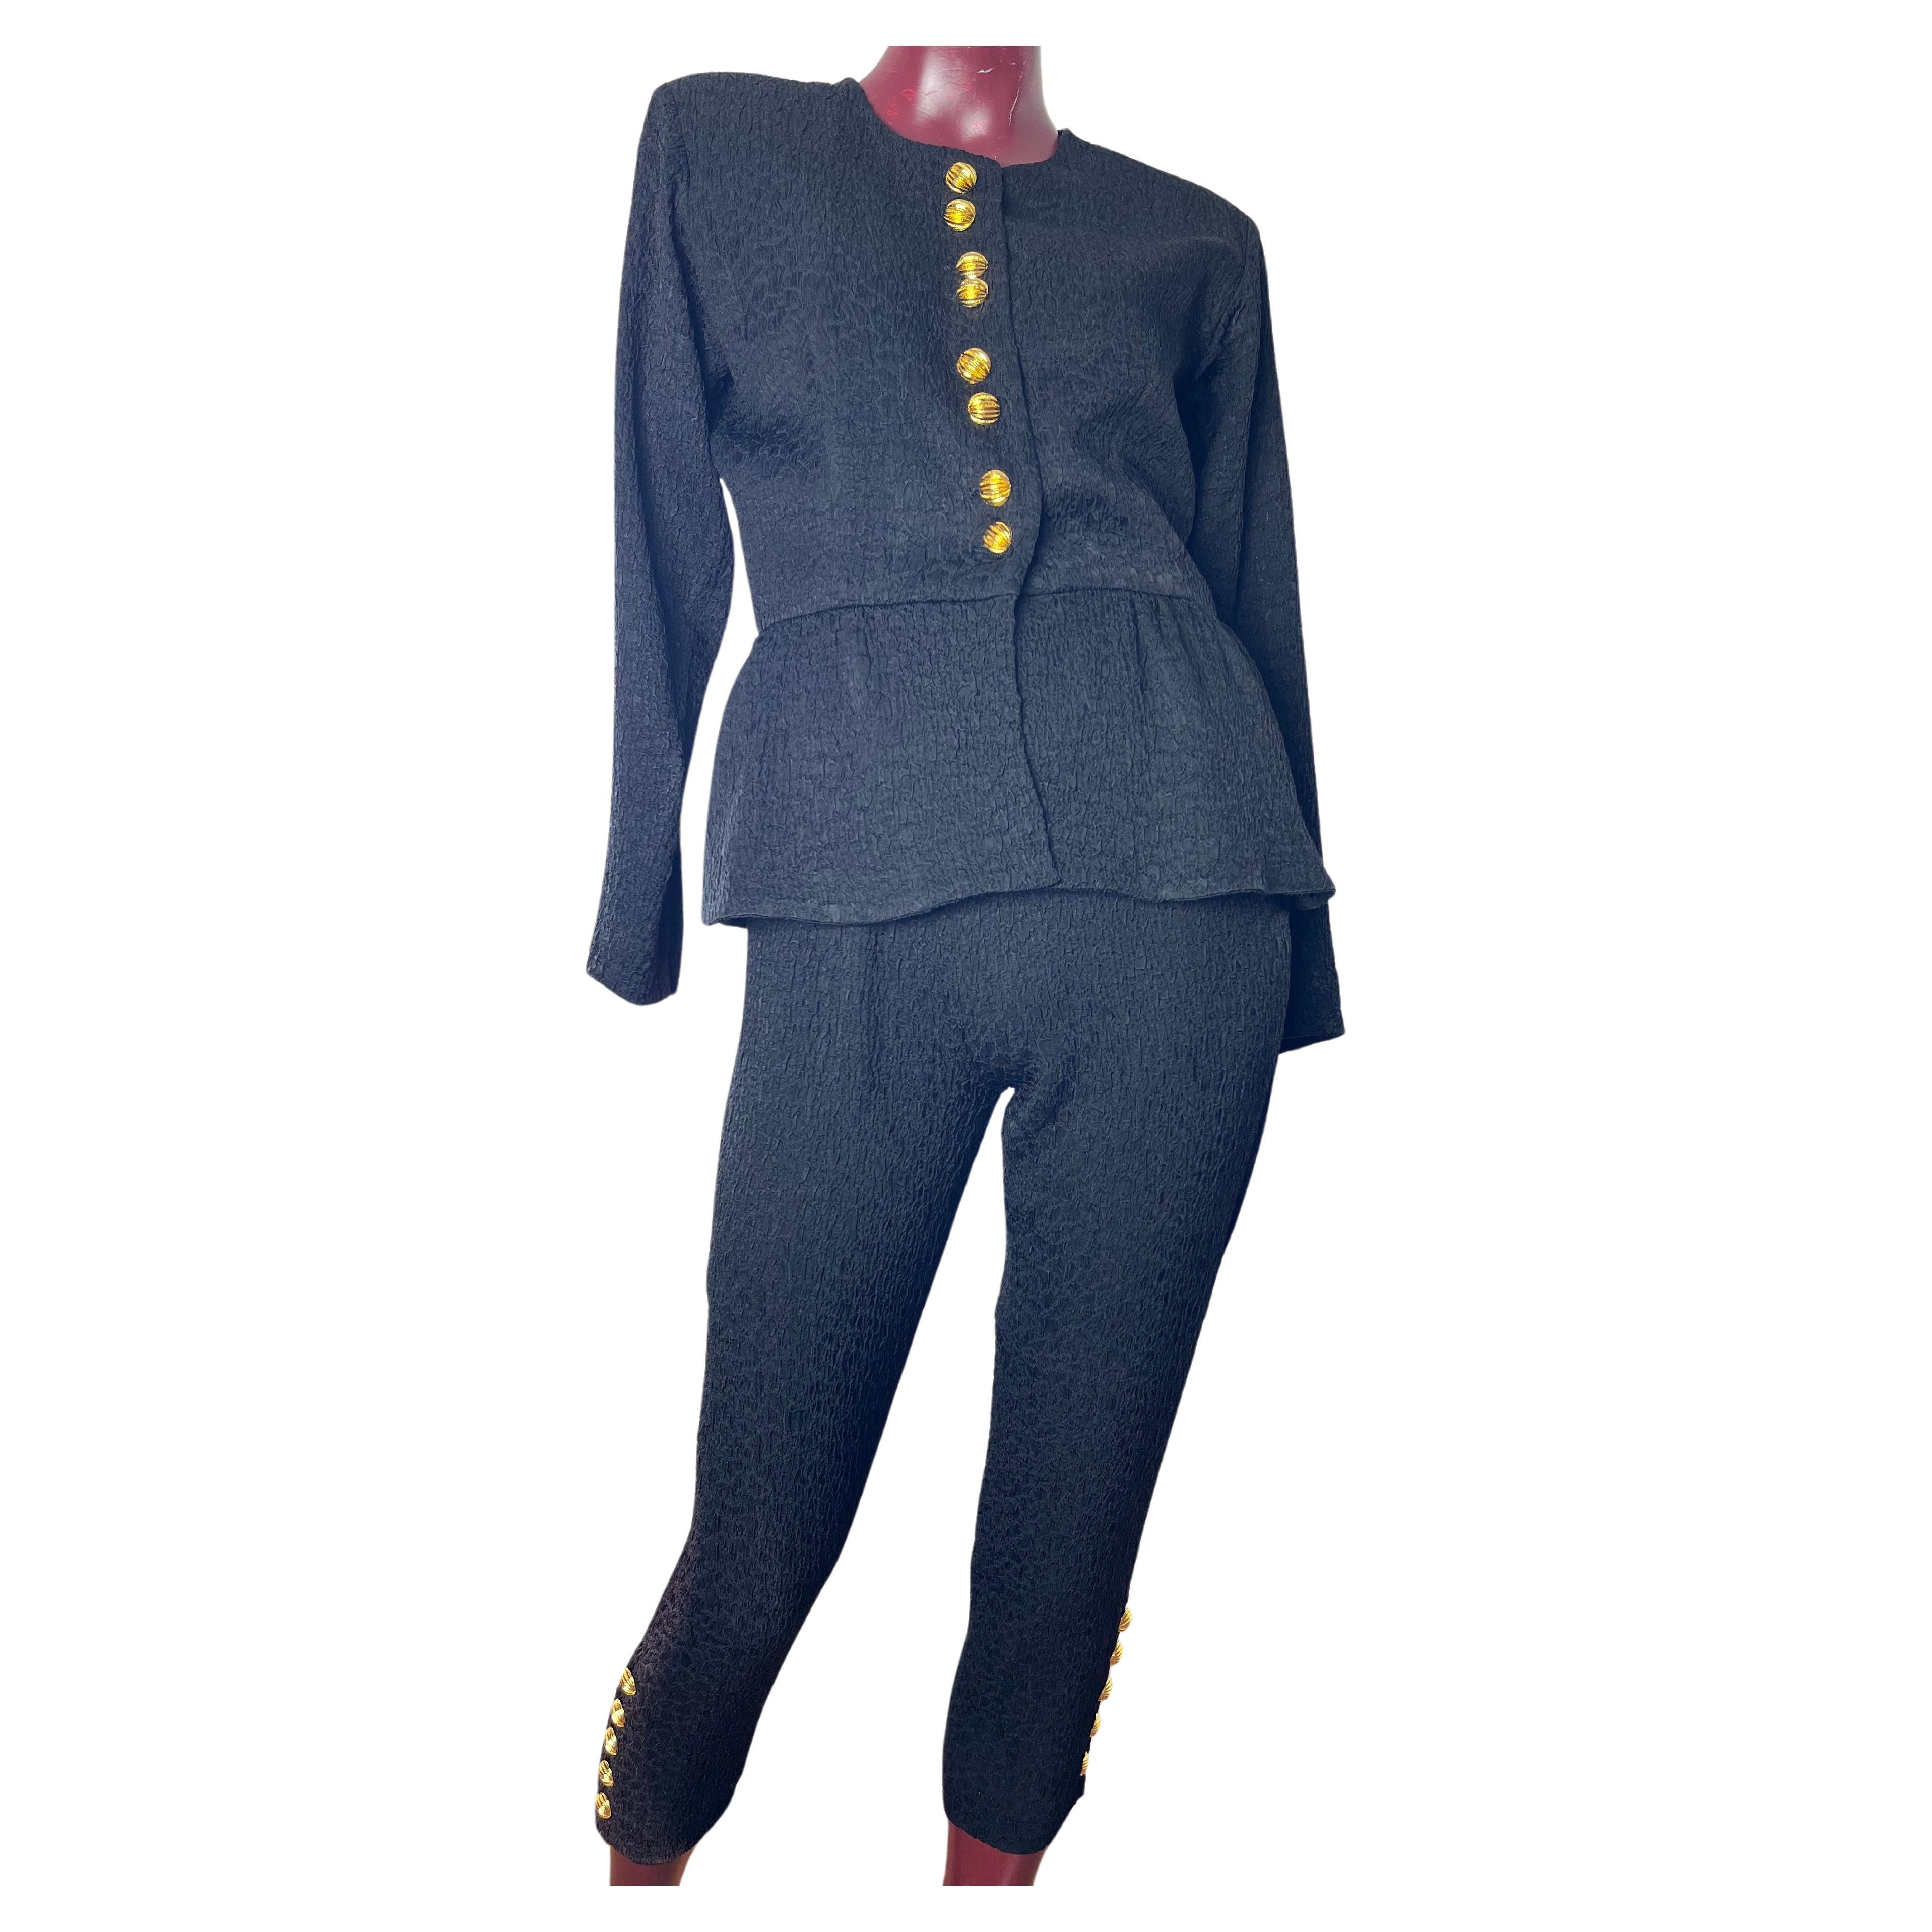 black pants ysl suit with gold buttons For Sale